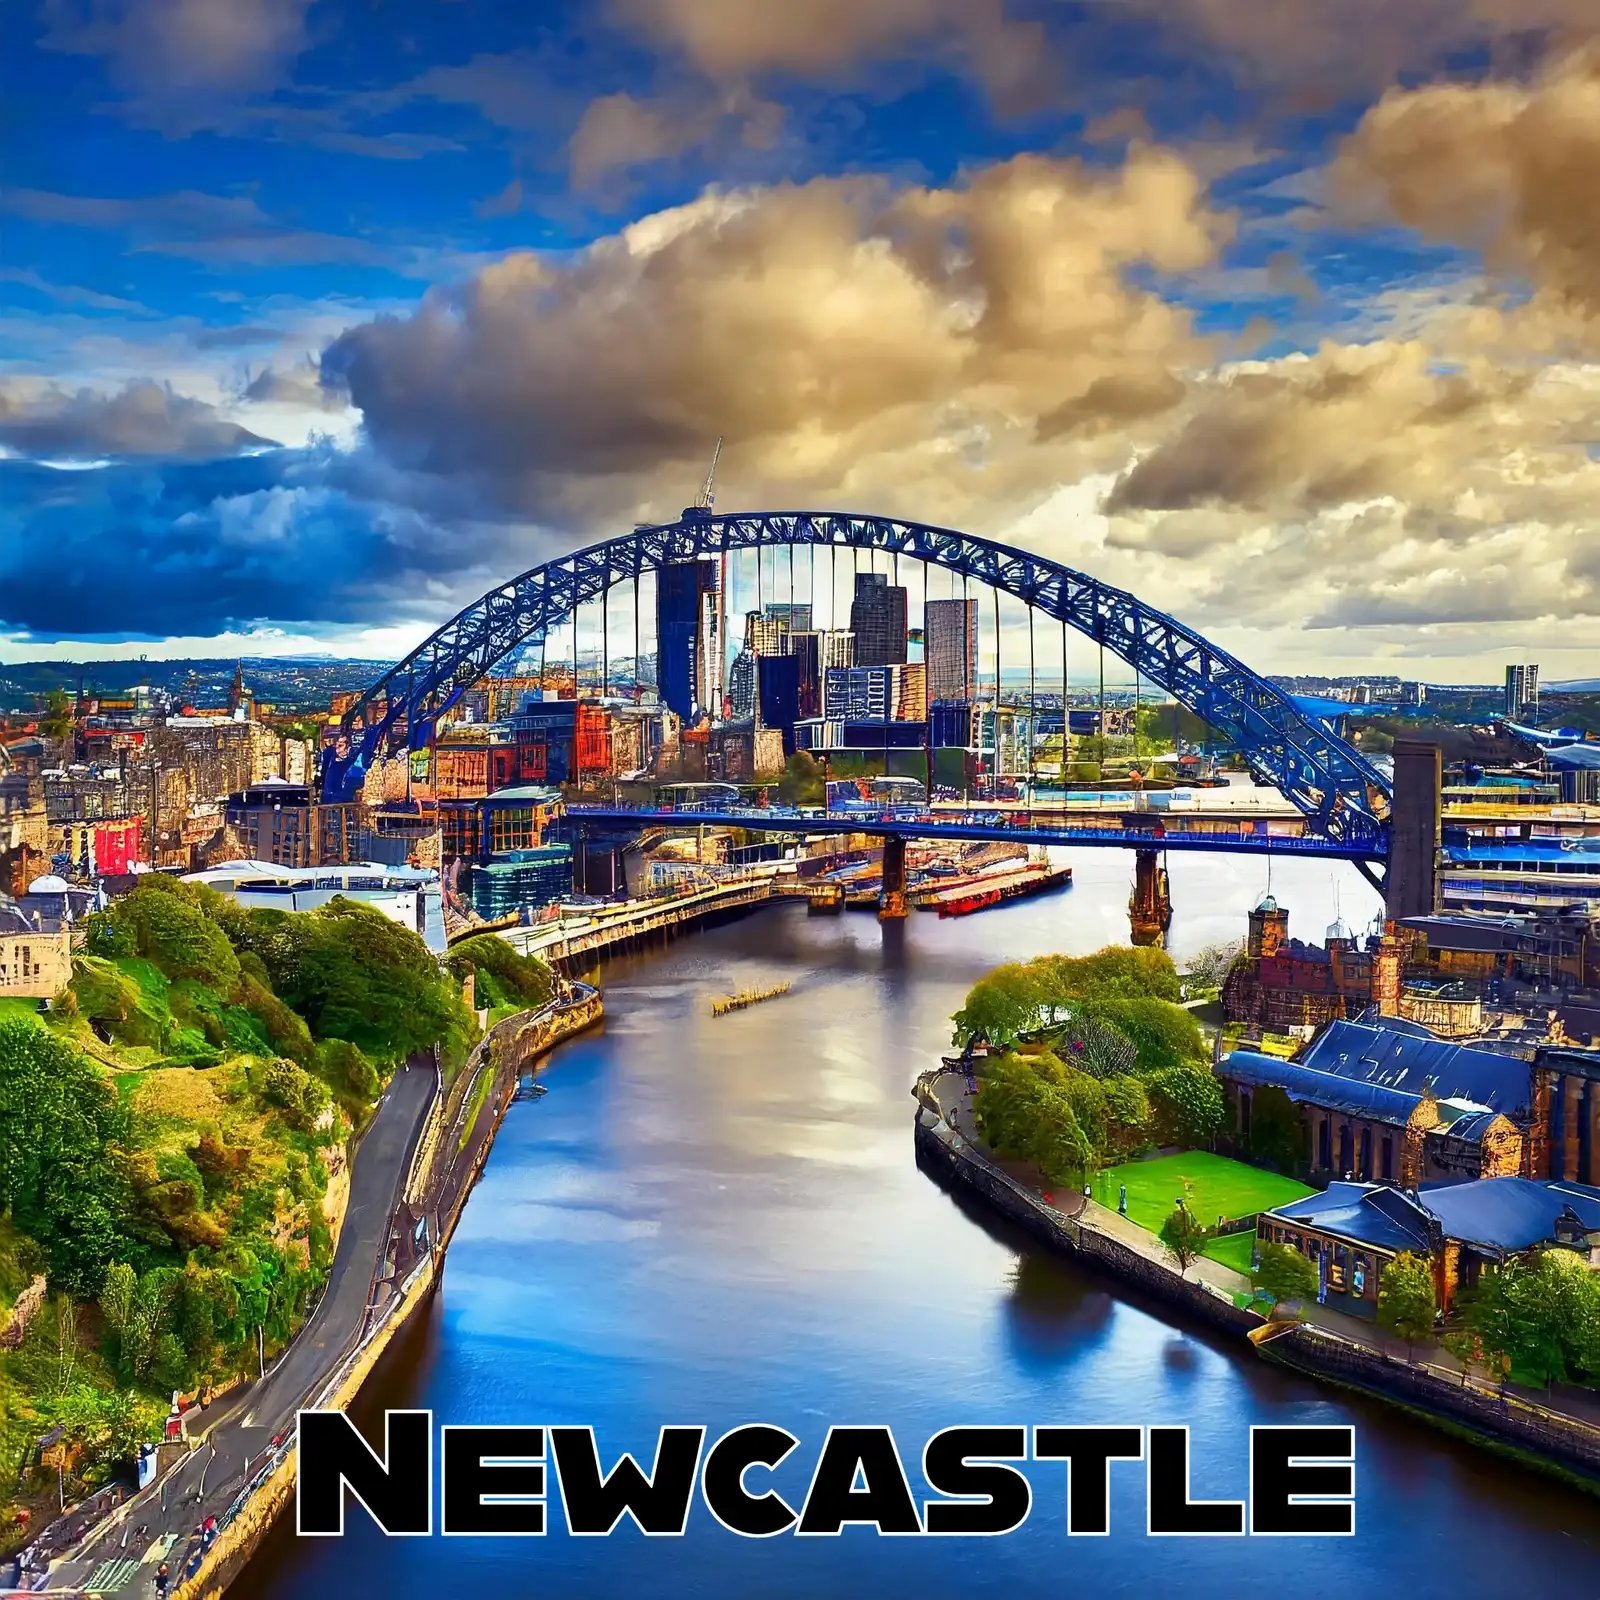 Aerial view of Newcastle with the Tyne Bridge over the river and cityscape, under a cloudy sky.